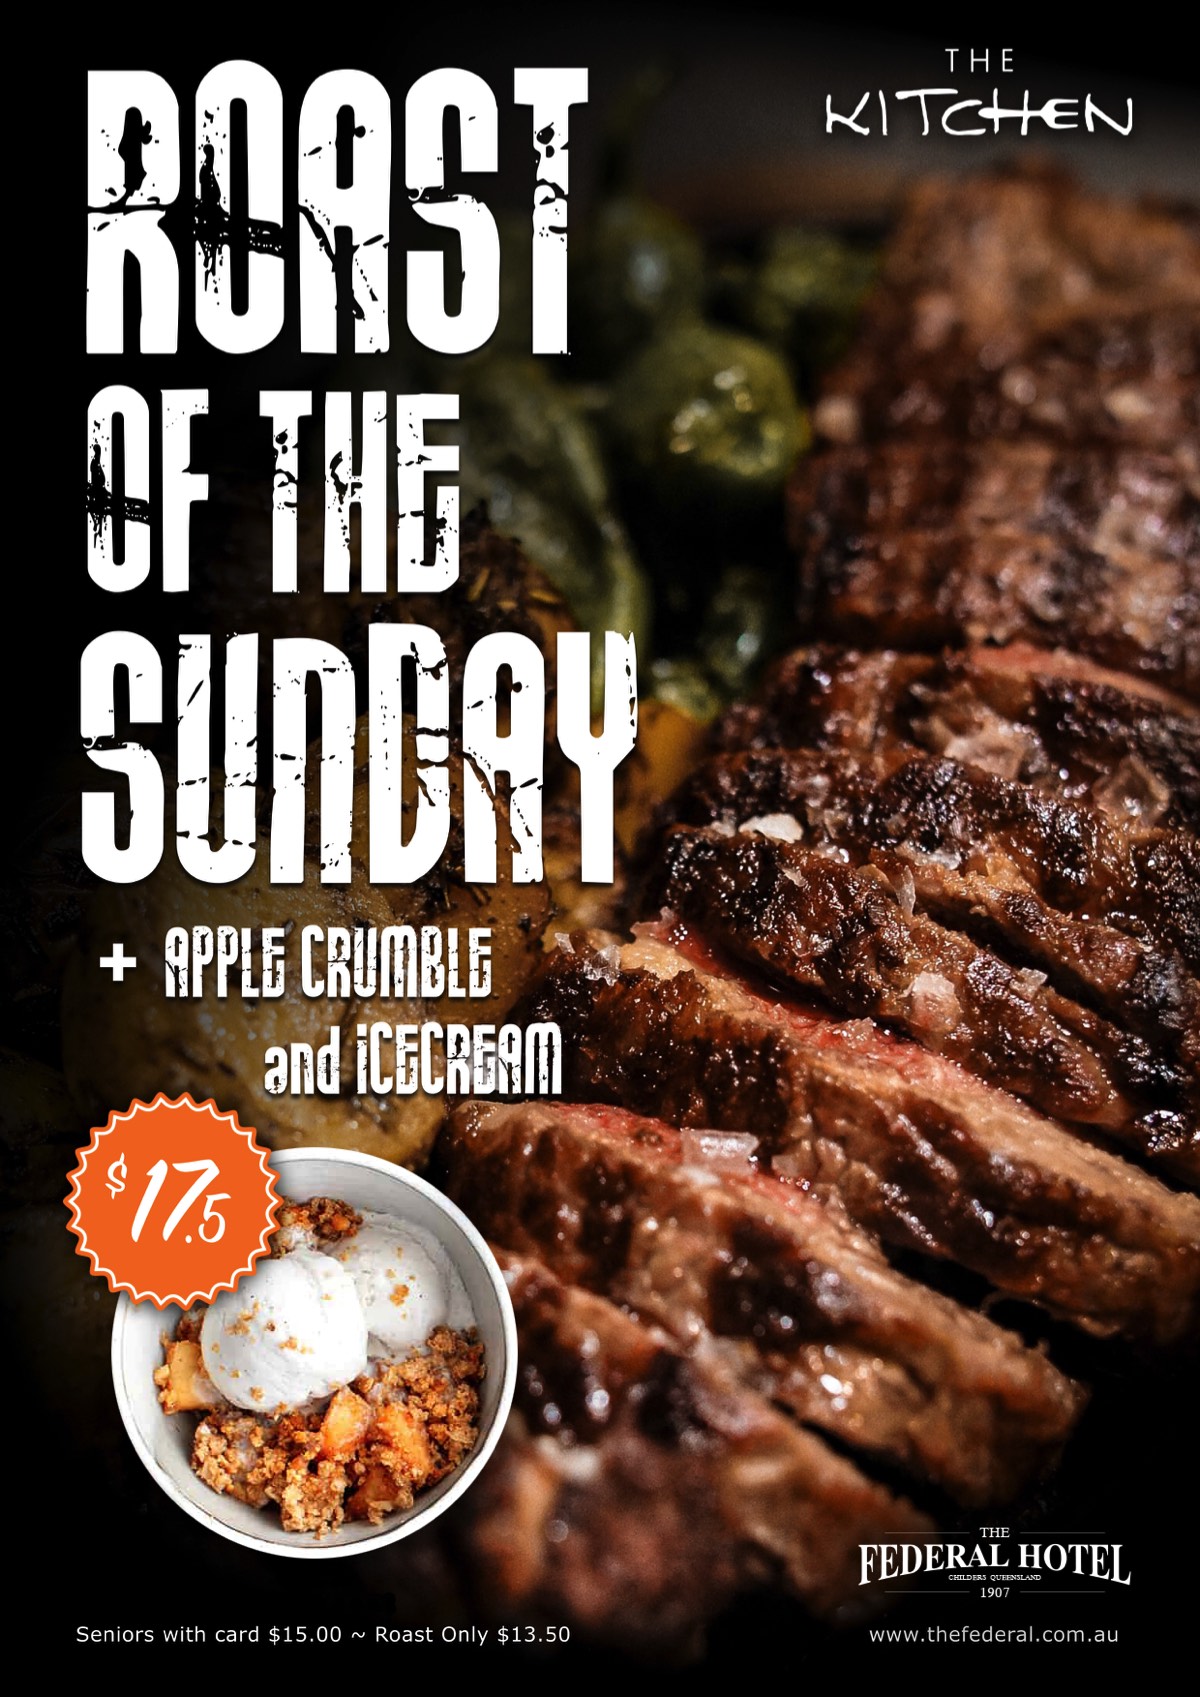 Sunday - Roast of the Day - 2 Courses $17.50